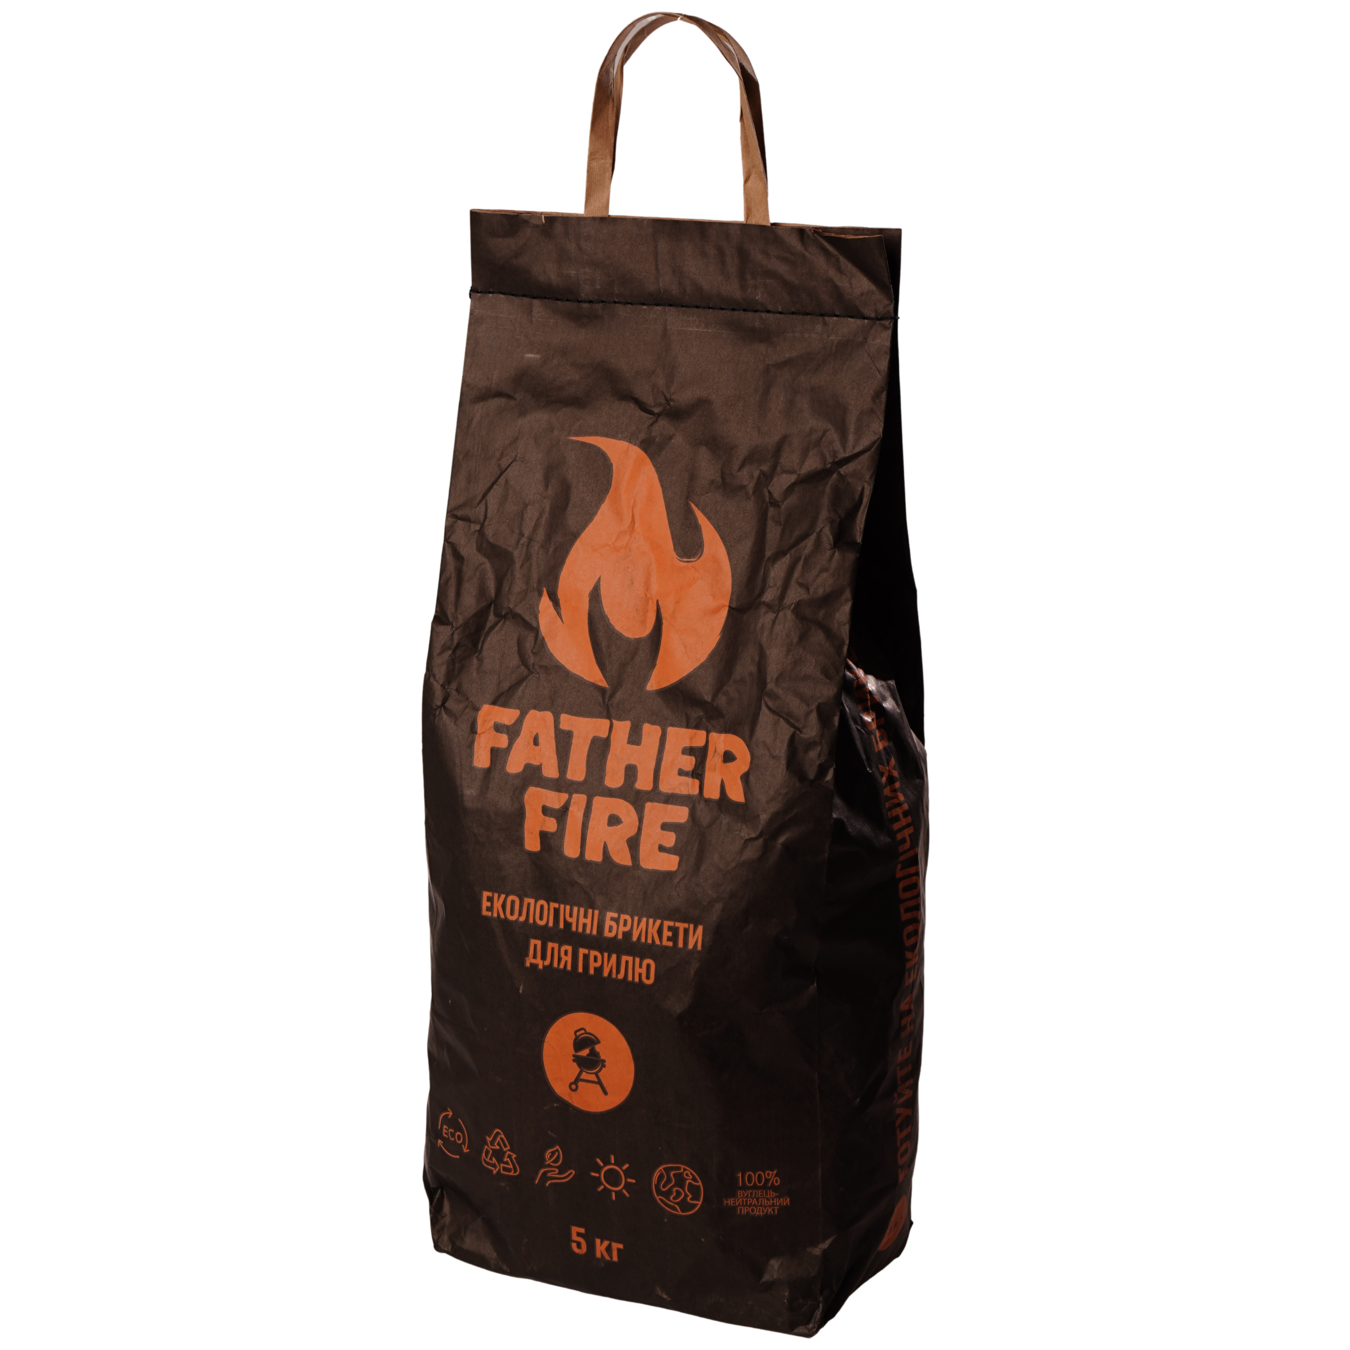 Father Fire briquetted charcoal 5 kg